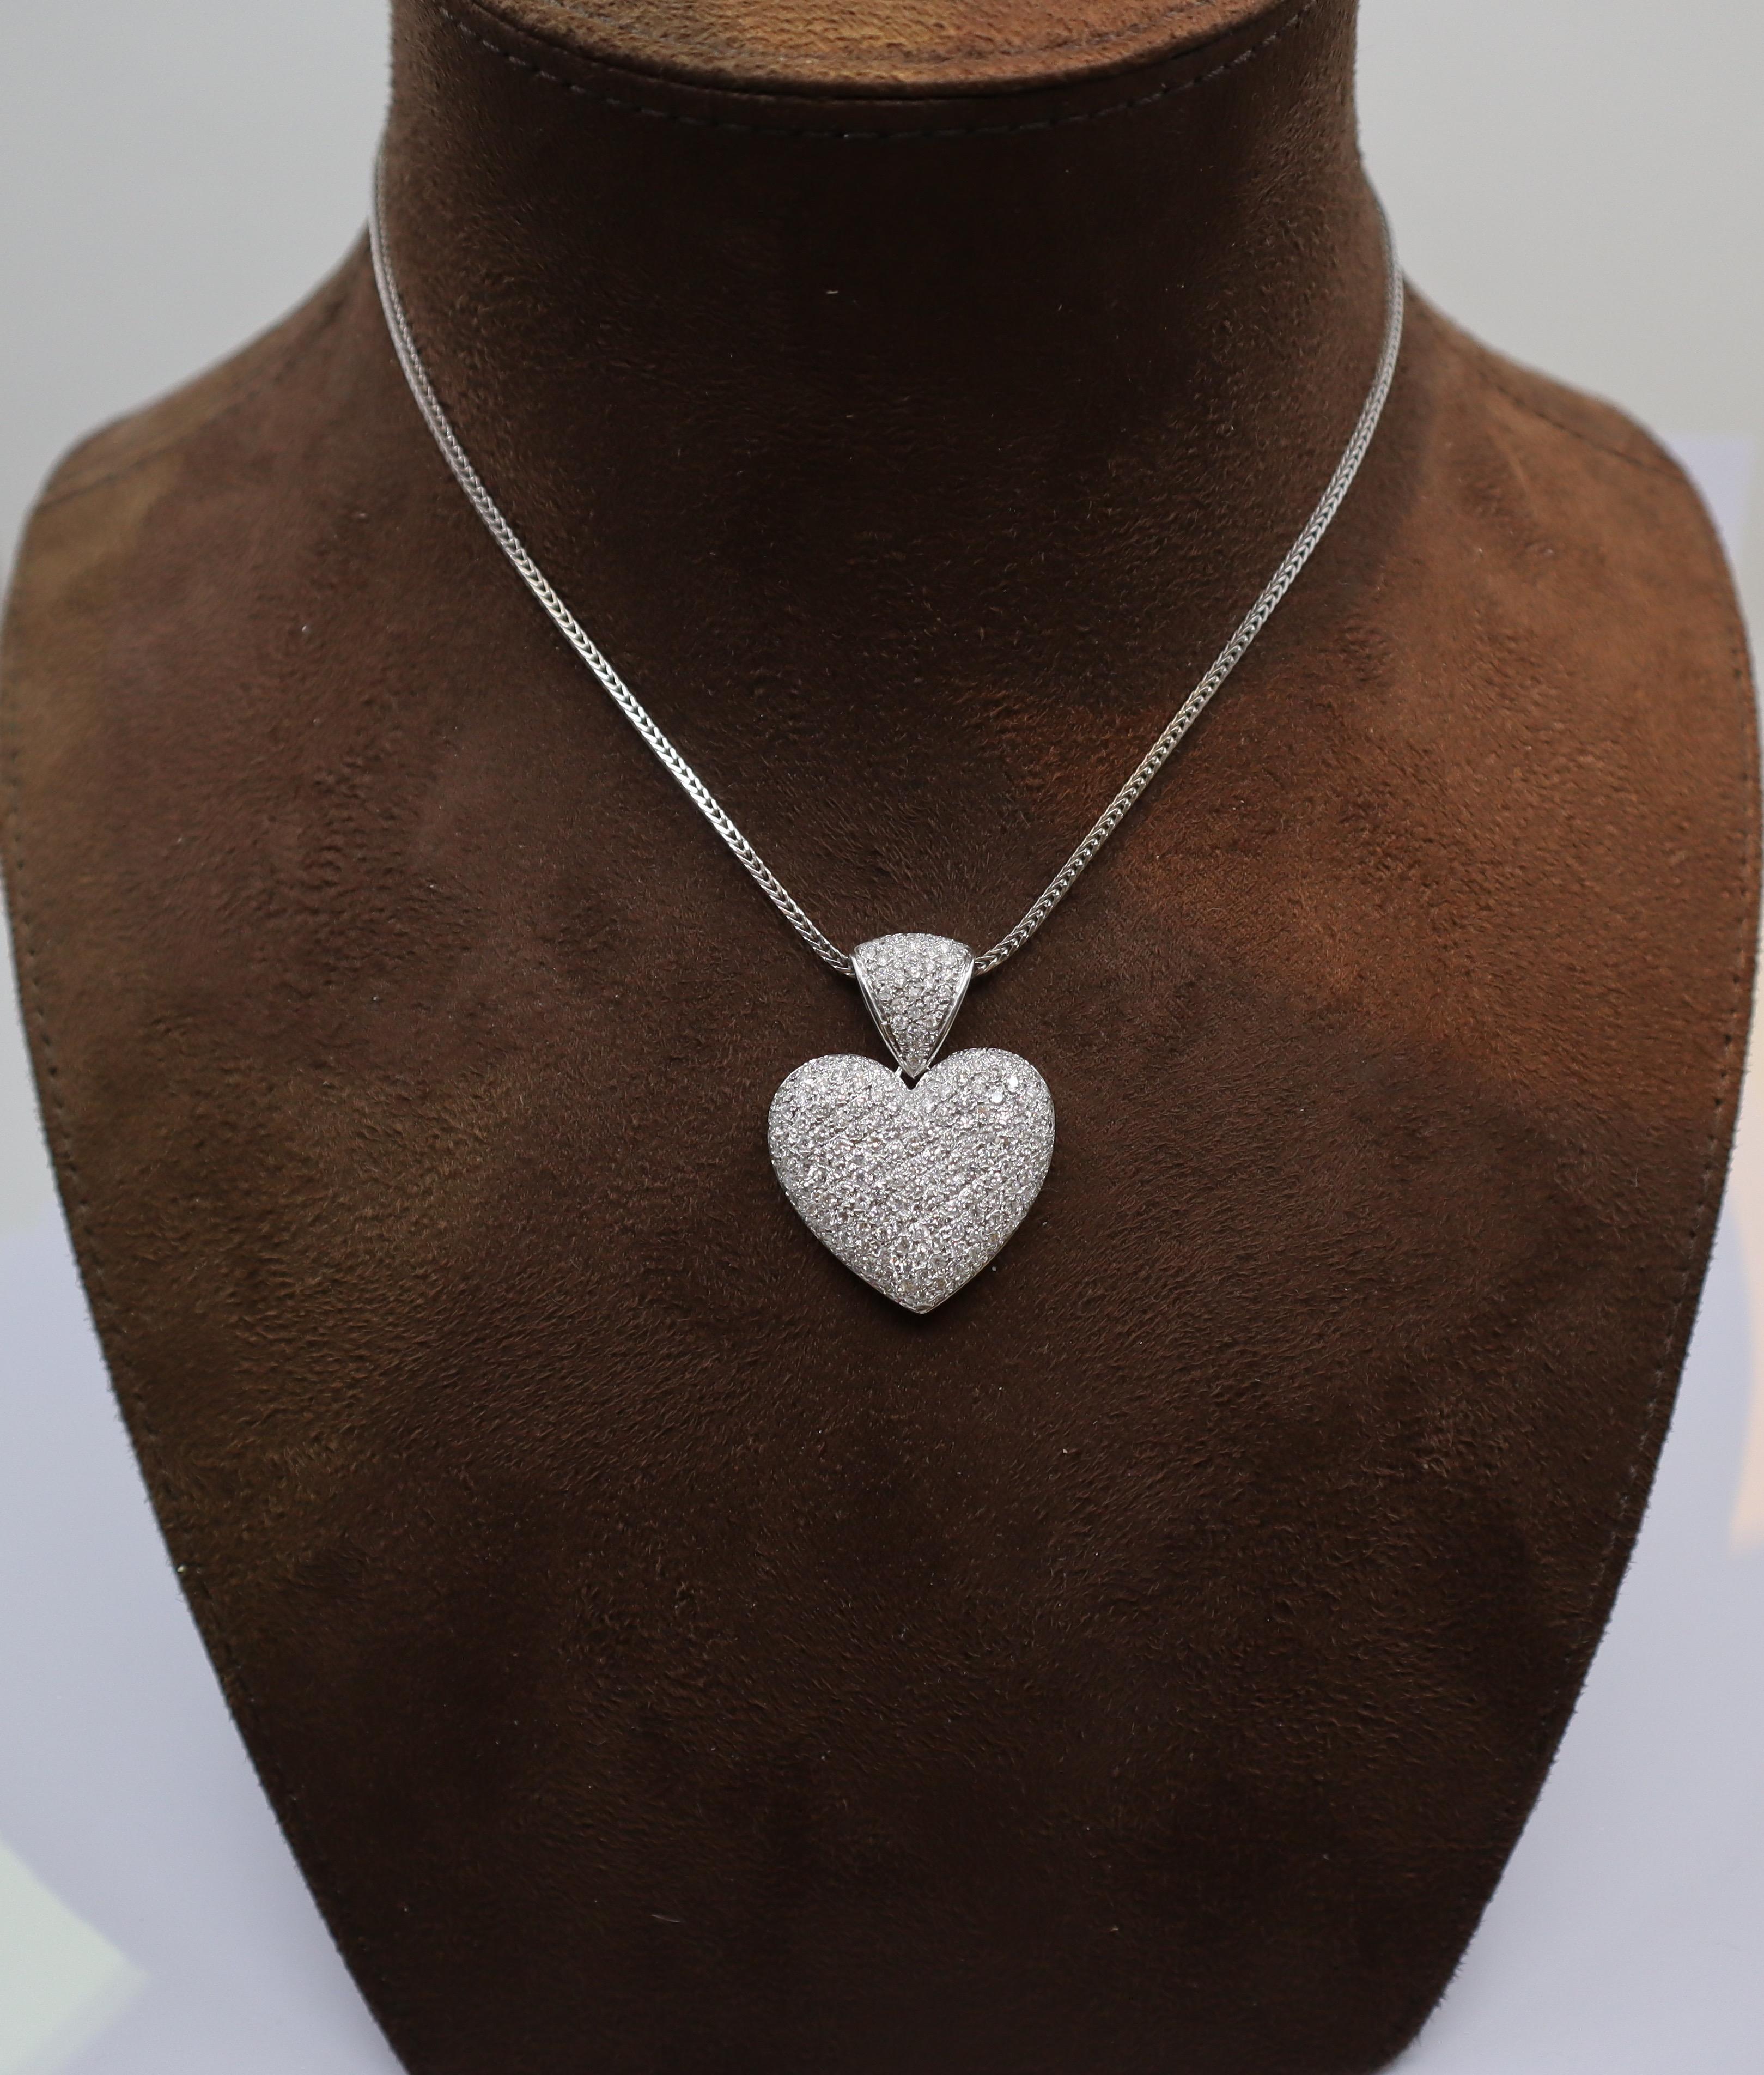 White gold heart necklace fully paved with round cut diamonds, for approximately 7 carats, and its white gold chain.
Heart pendent dimension : 4 x 3 cm 
Total length chain + pendant : 23 cm approximately. 
Modern work. 